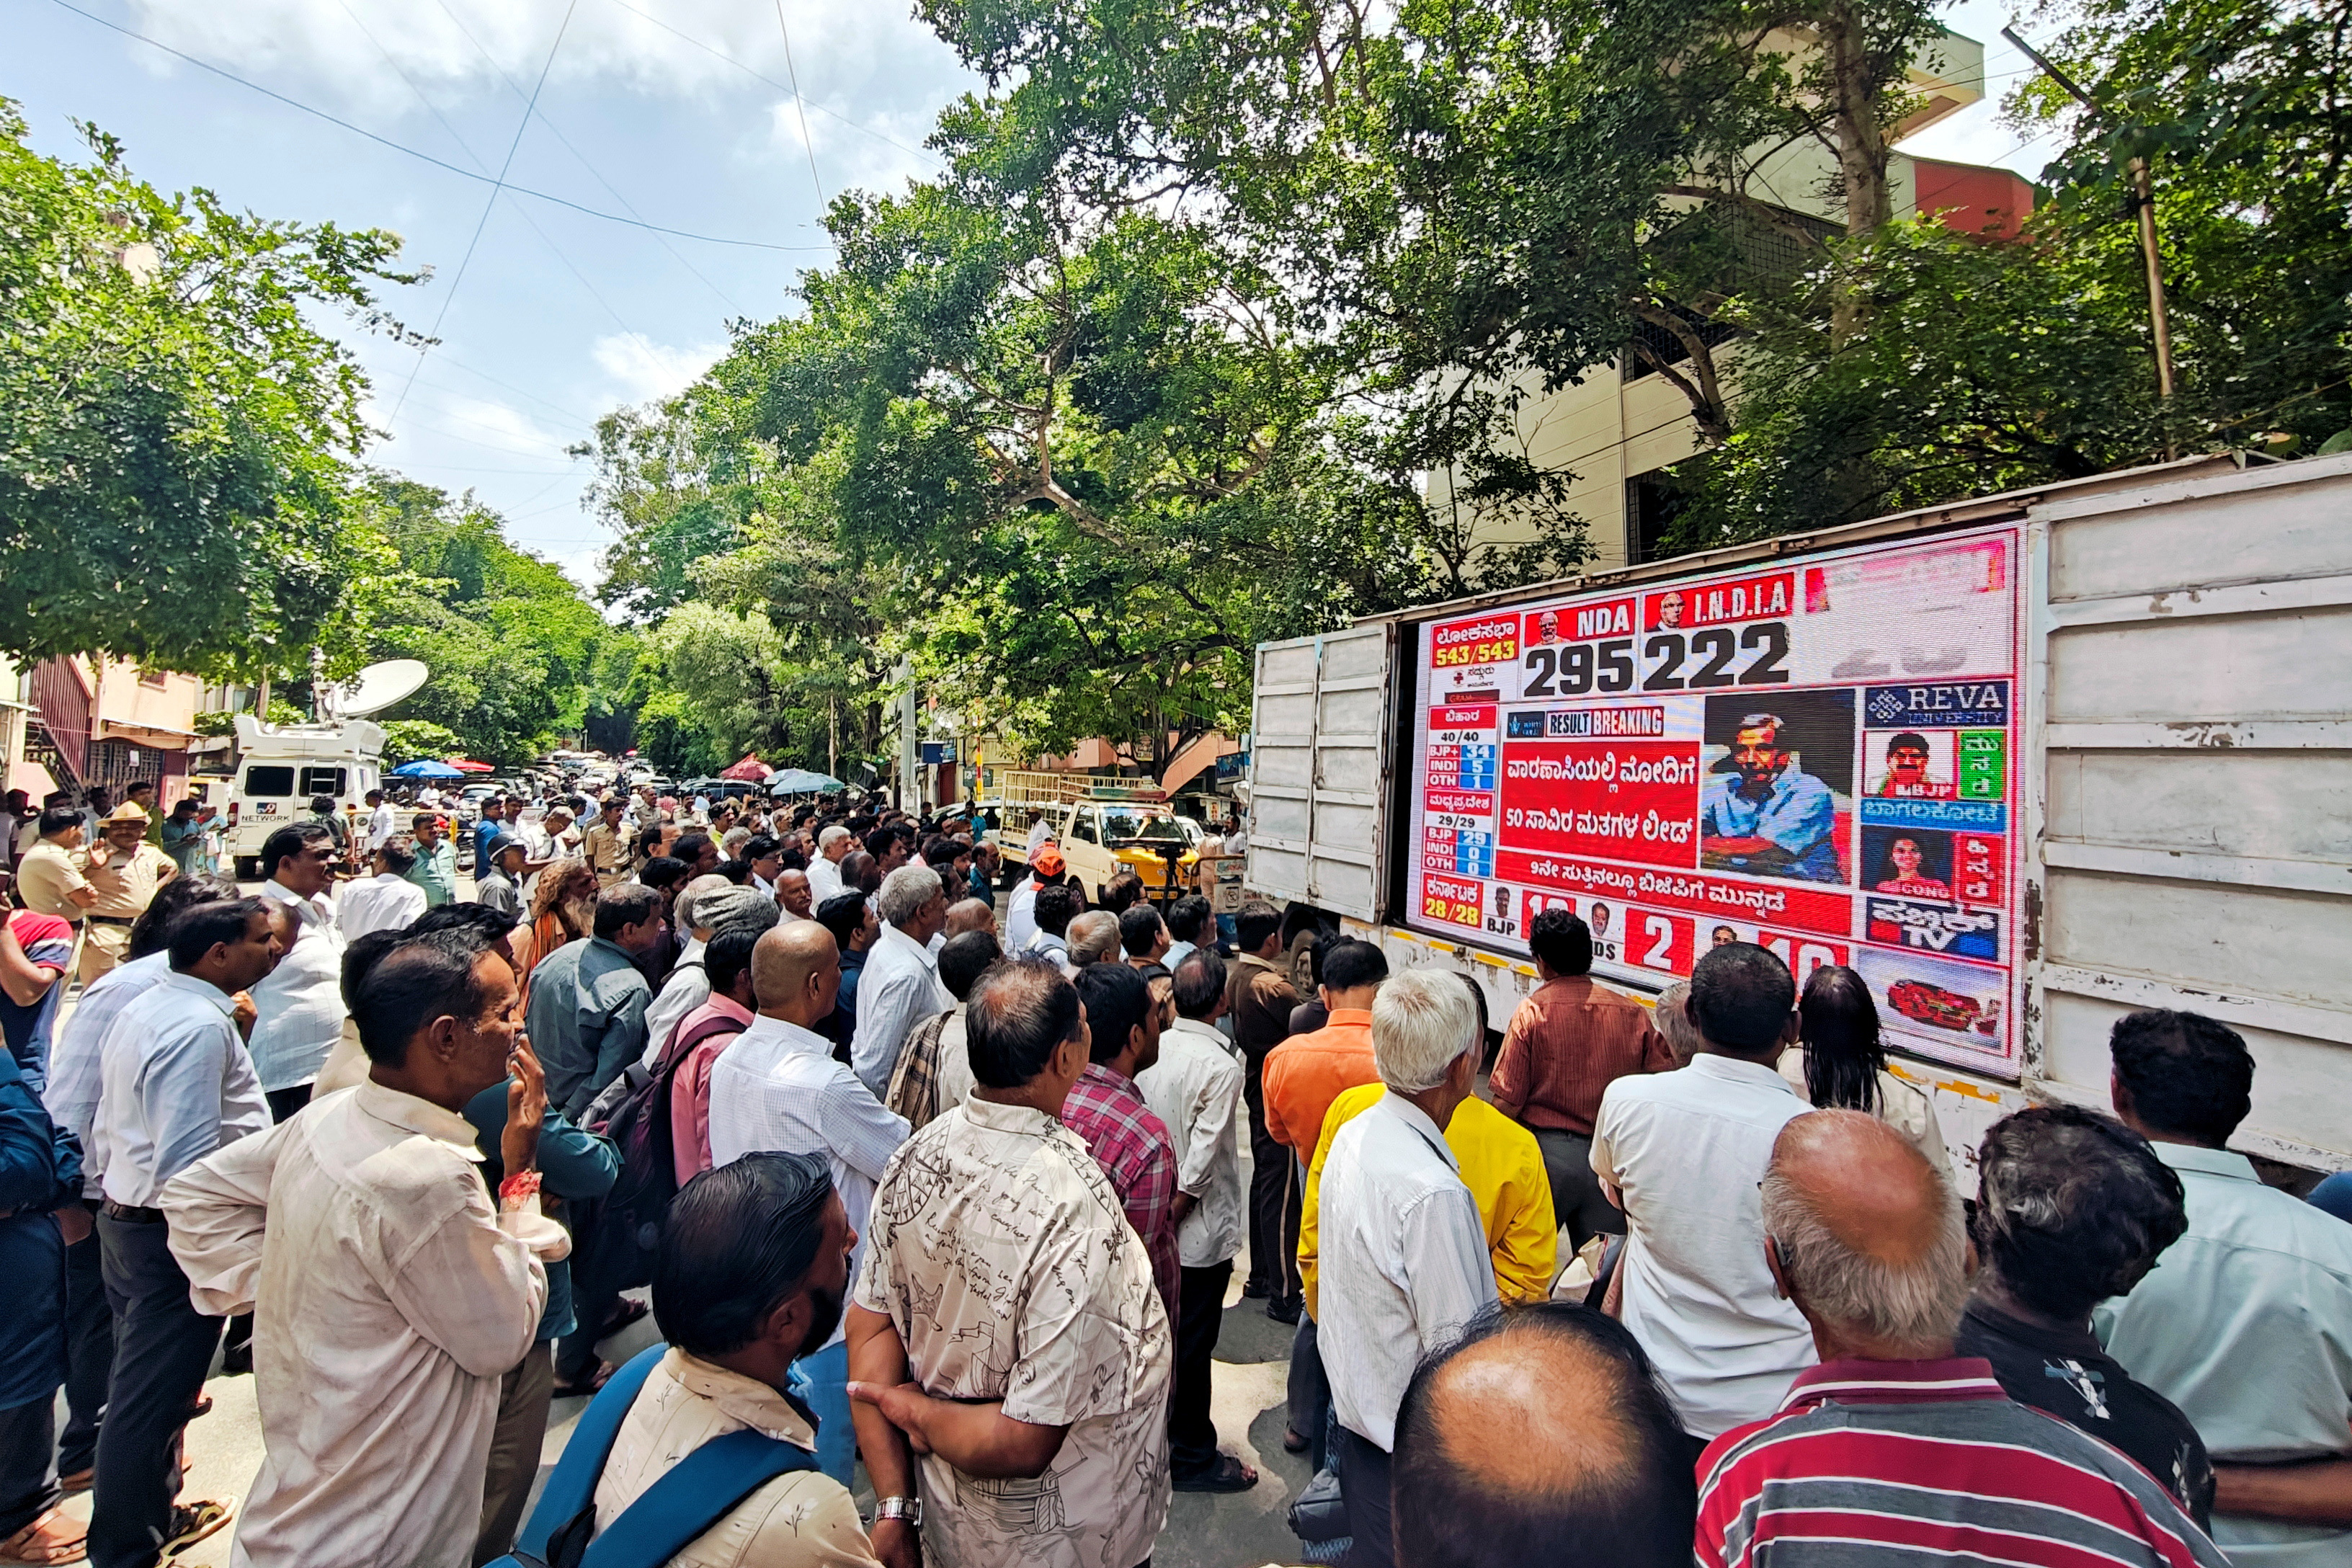 Supporters of the Bharatiya Janata Party watch a screen showing initial poll results outside its party office in Bengaluru